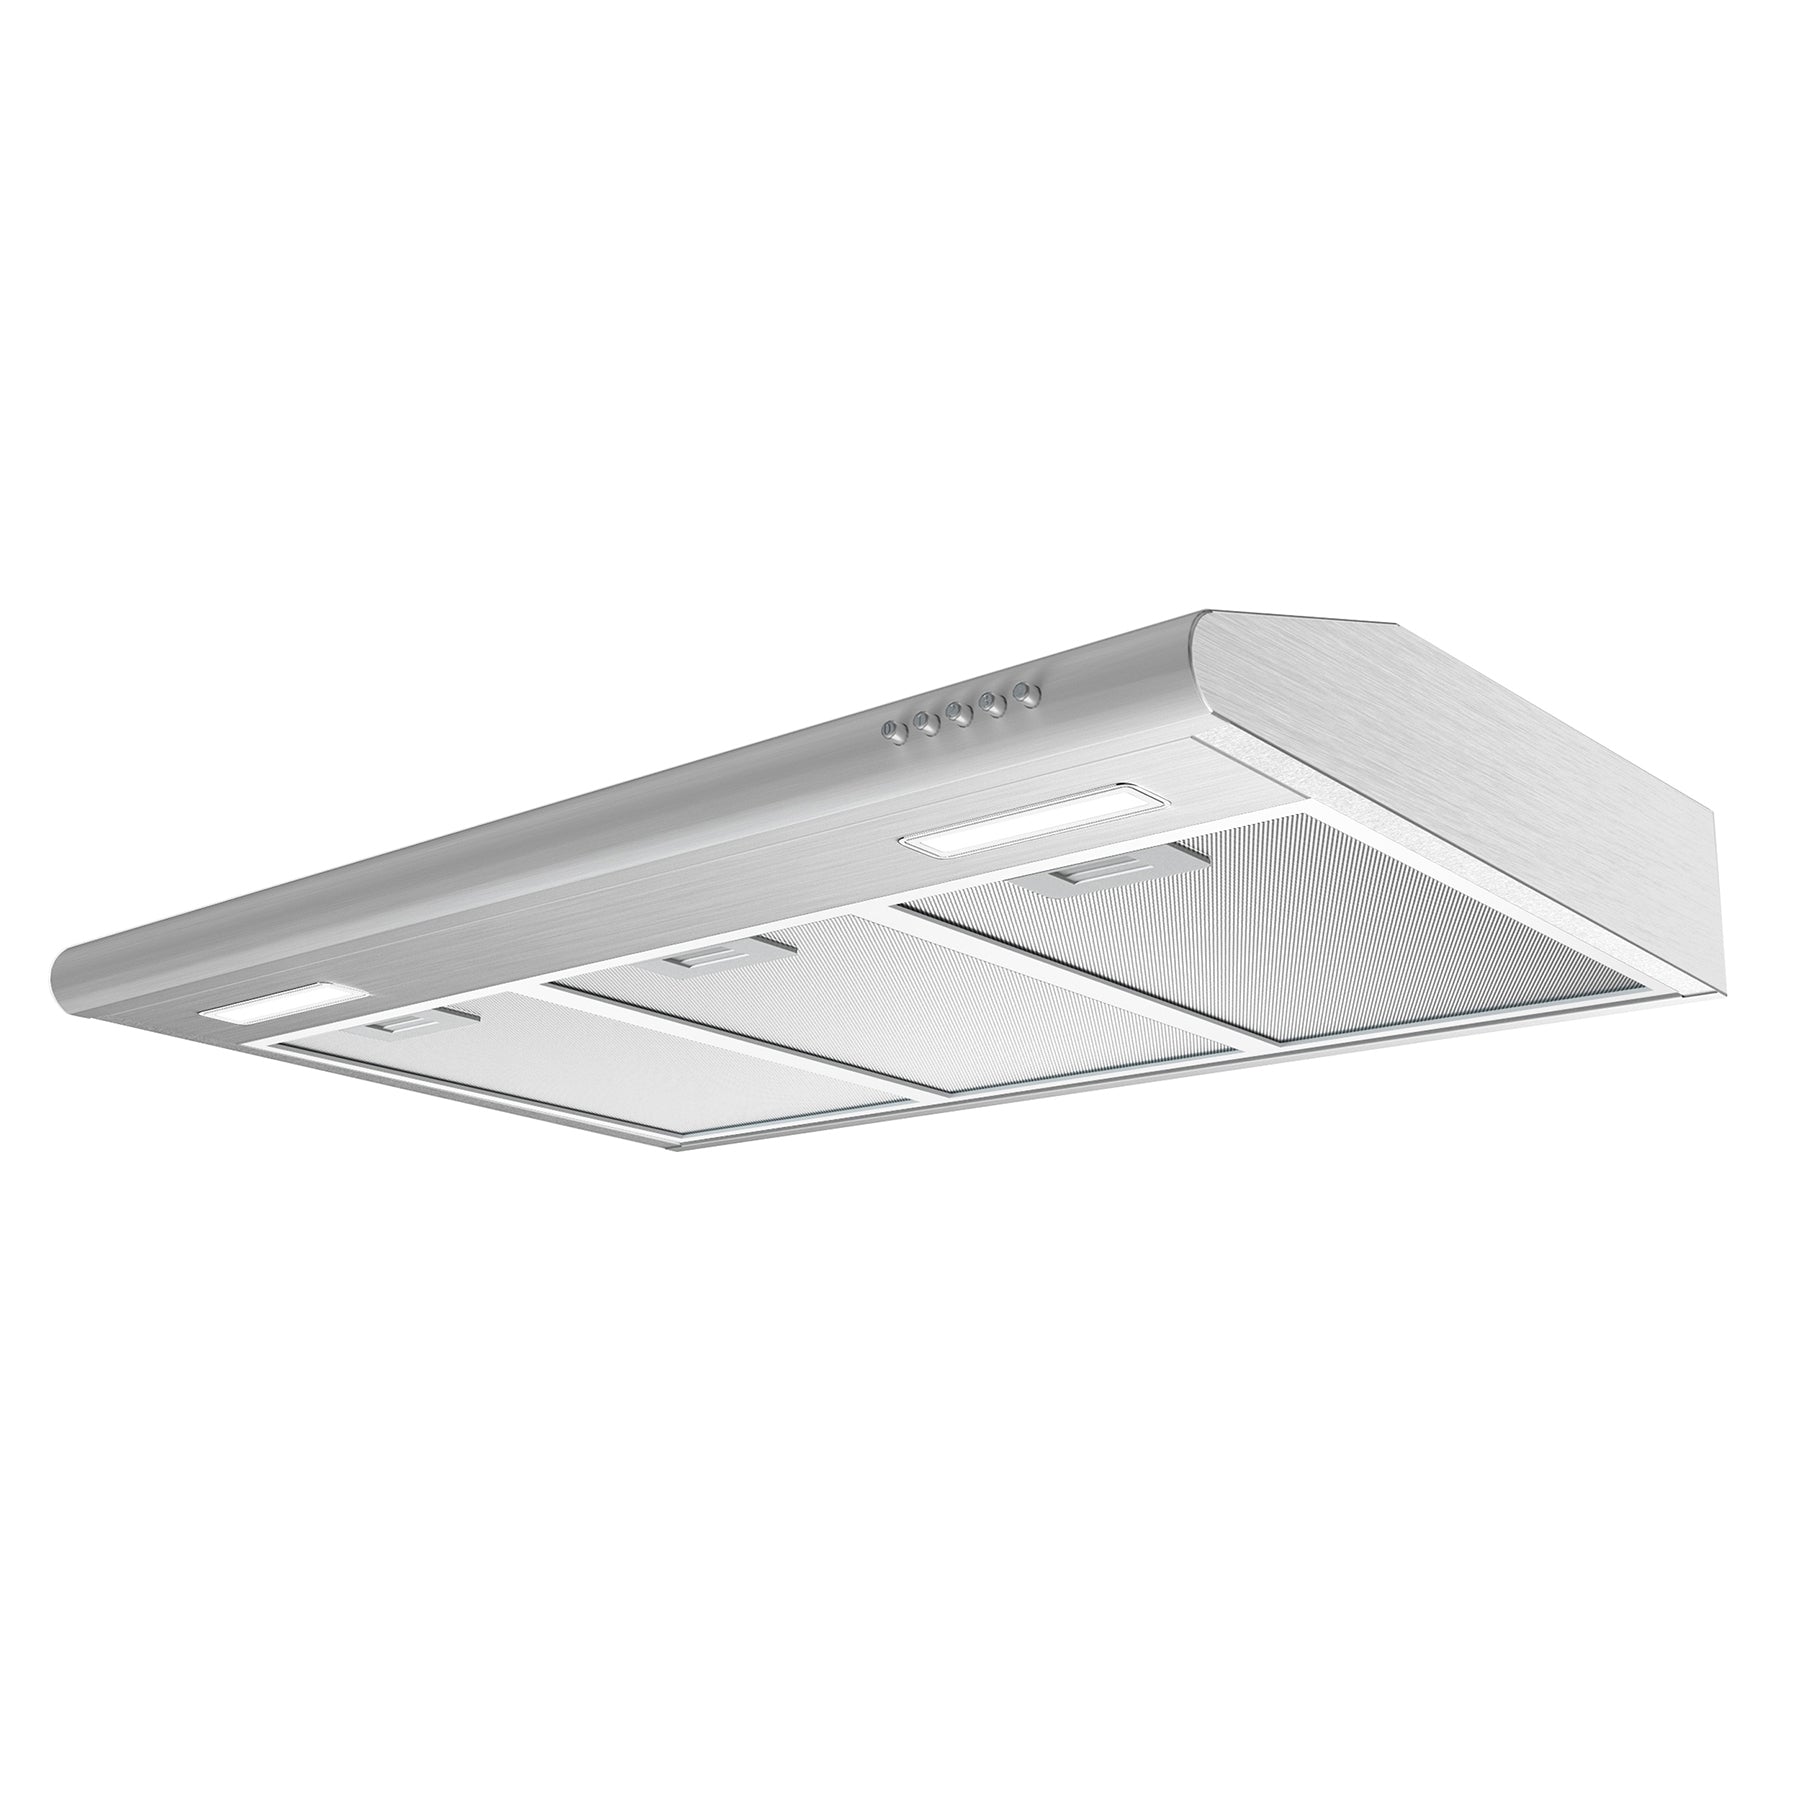 CIARRA 30 in. 200 CFM Convertible Under Cabinet Range Hood in Black with  LED Lights CAB75918B - The Home Depot